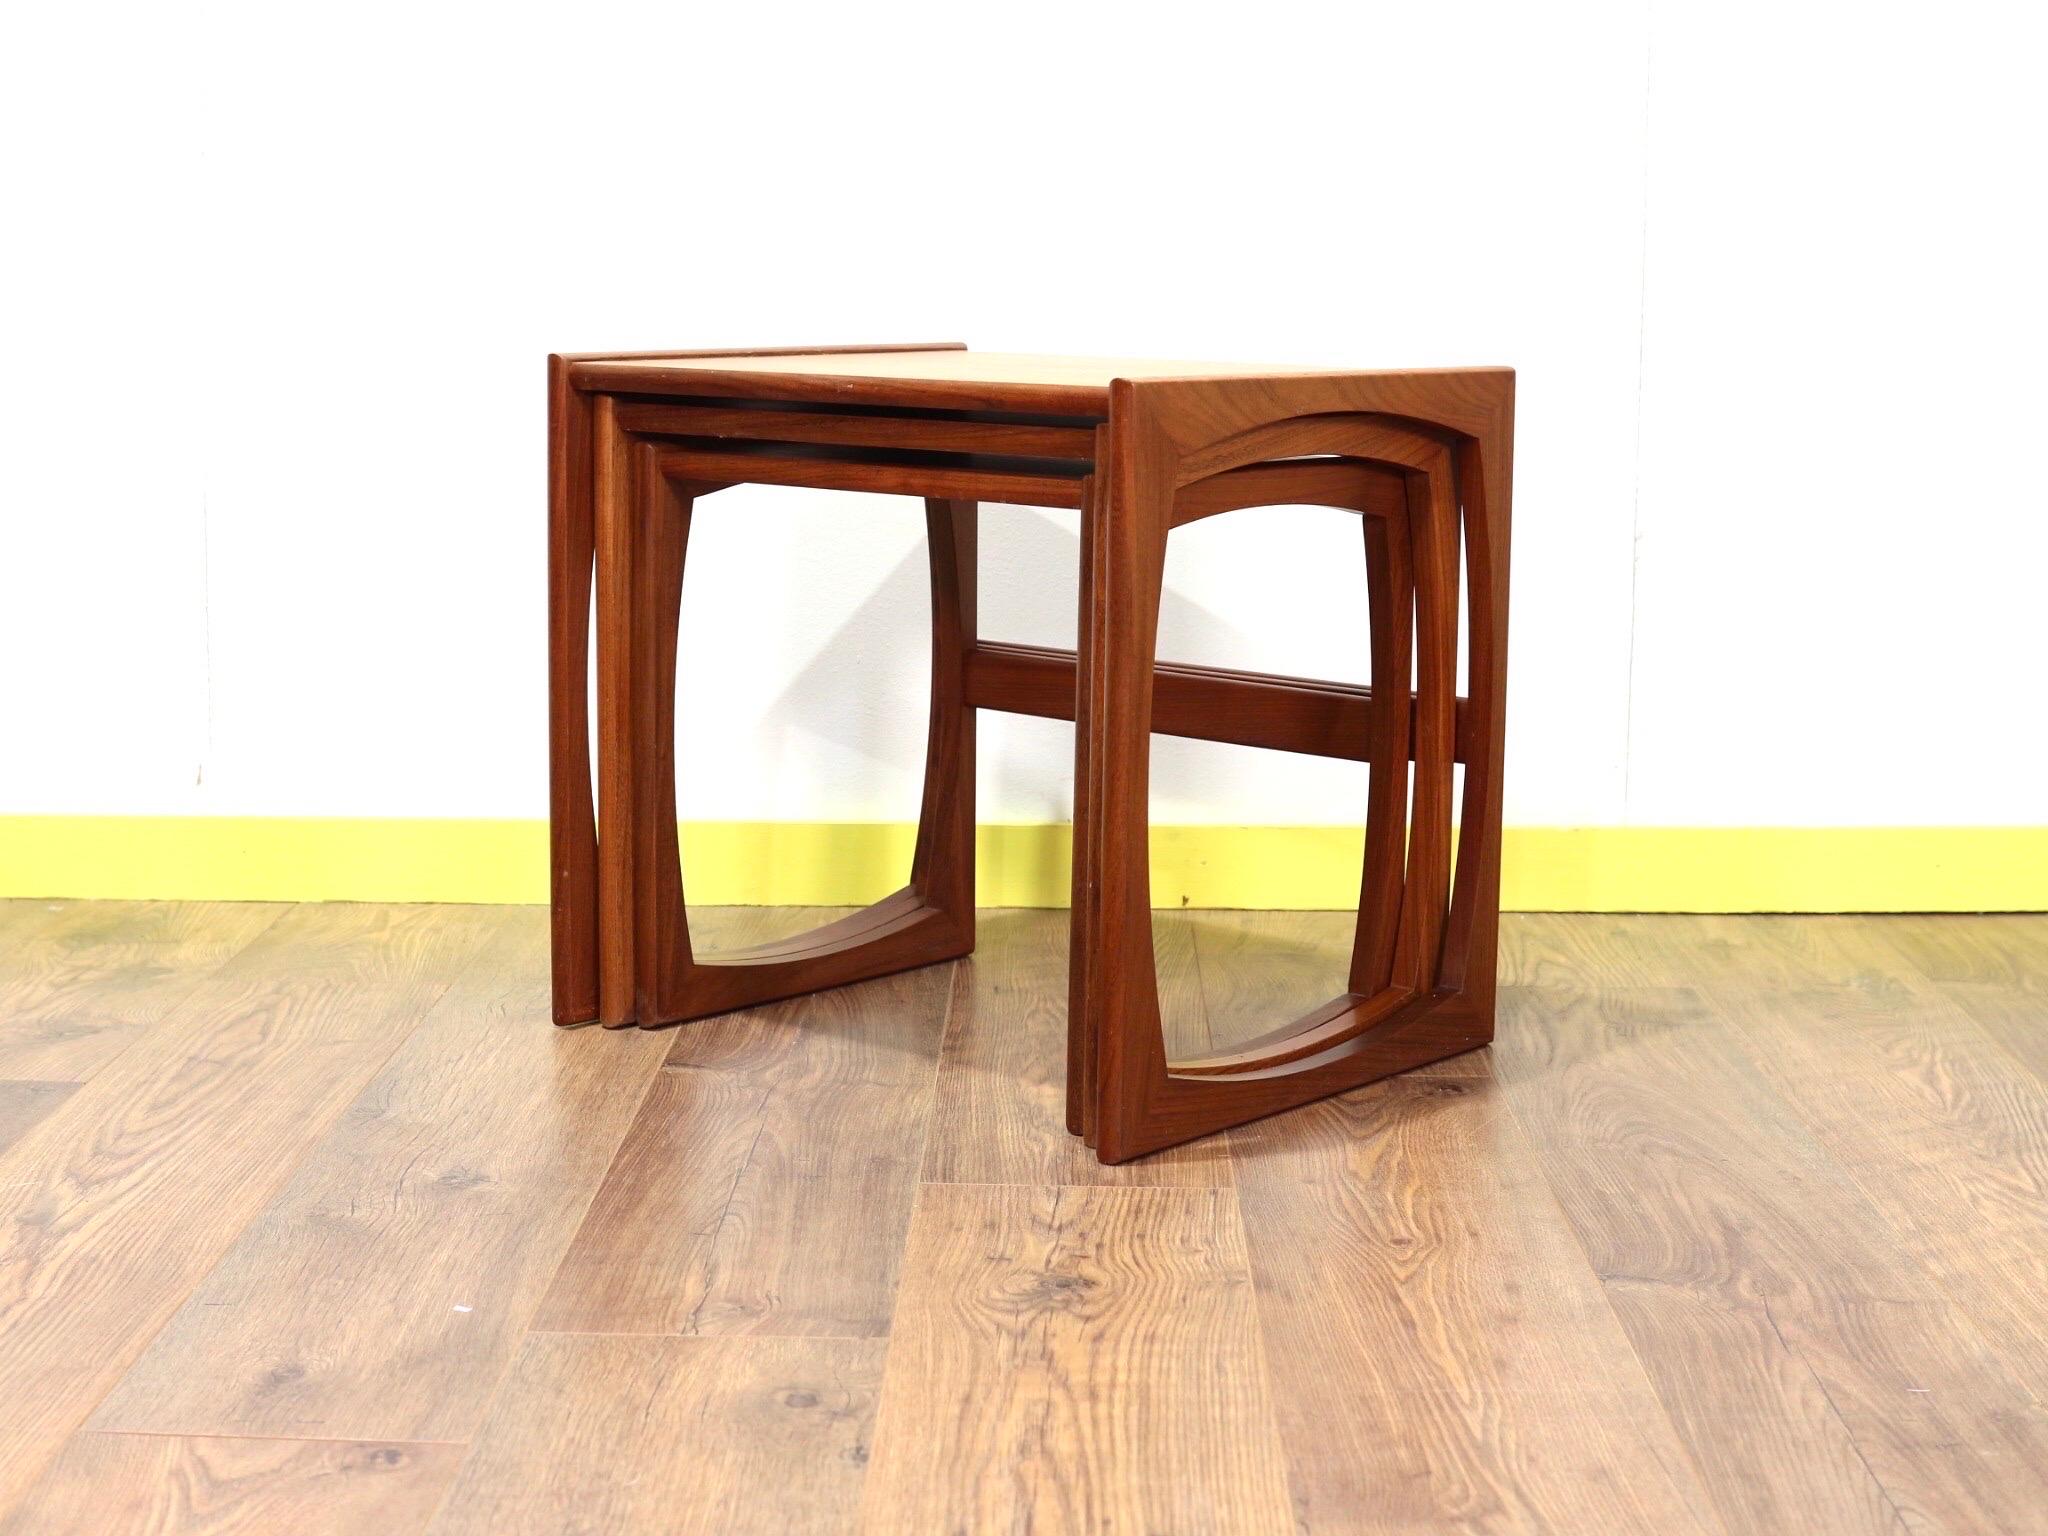 Set of 3 nesting tables in the classic style by G-Plan are part of the quadrille range with teak tops and solid teak framework the tables are in great original condition.

 

Dimensions

Large Table

Cms - W53.5 D43 H49

Inches W21 D17